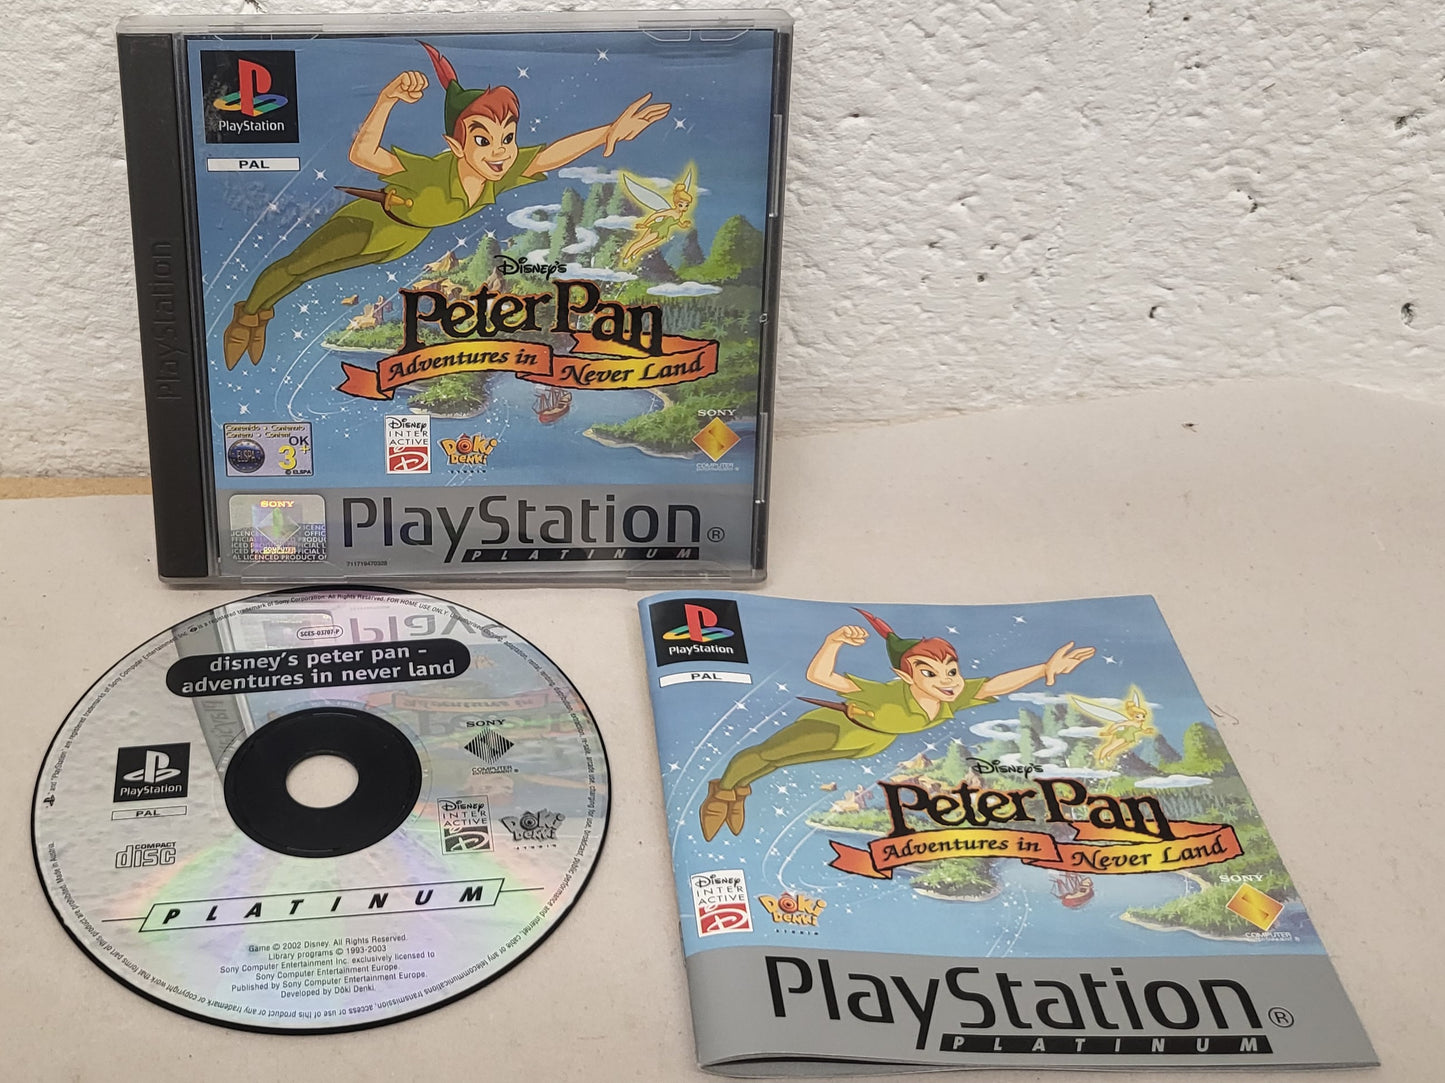 Disney's Peter Pan Adventures in Never Land Sony Playstation 1 (PS1) Game